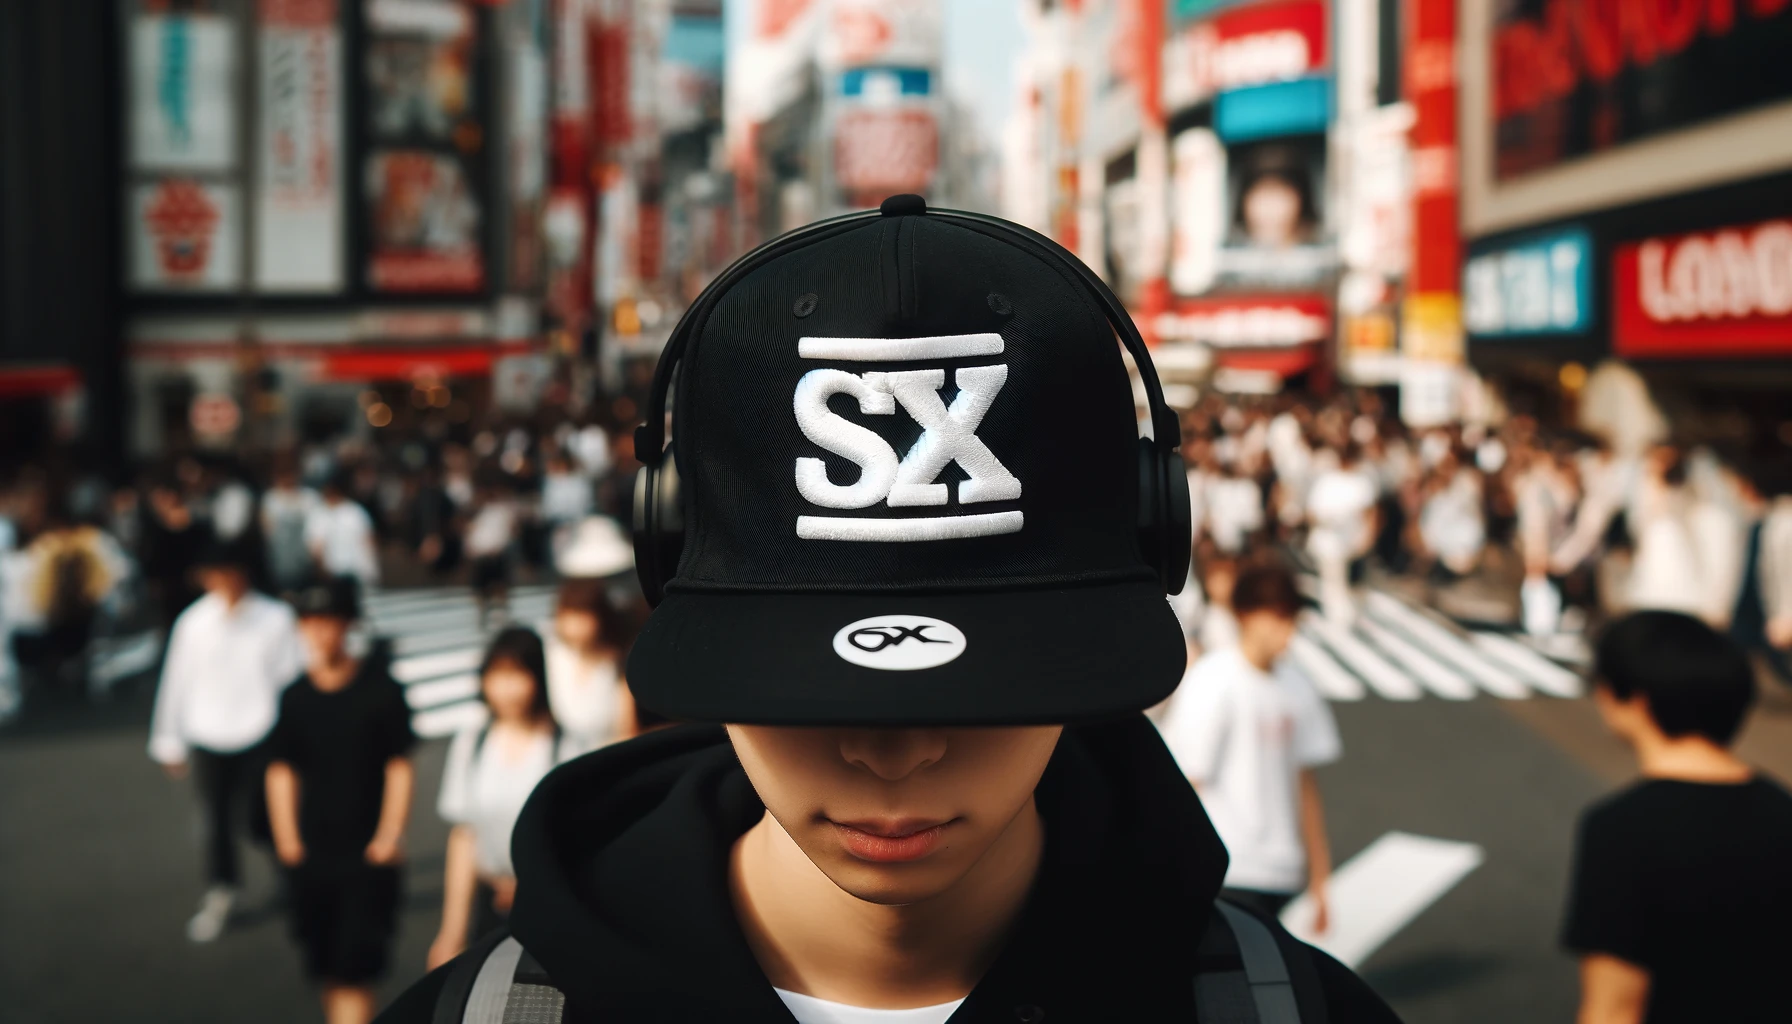 Japanese youth in a busy city street wearing a cap with a large black and white logo in the center. The cap features 'SX' letters, with the logo blurred, removed, or not visible from the angle. The image captures the vibrancy and style of Japanese youth.